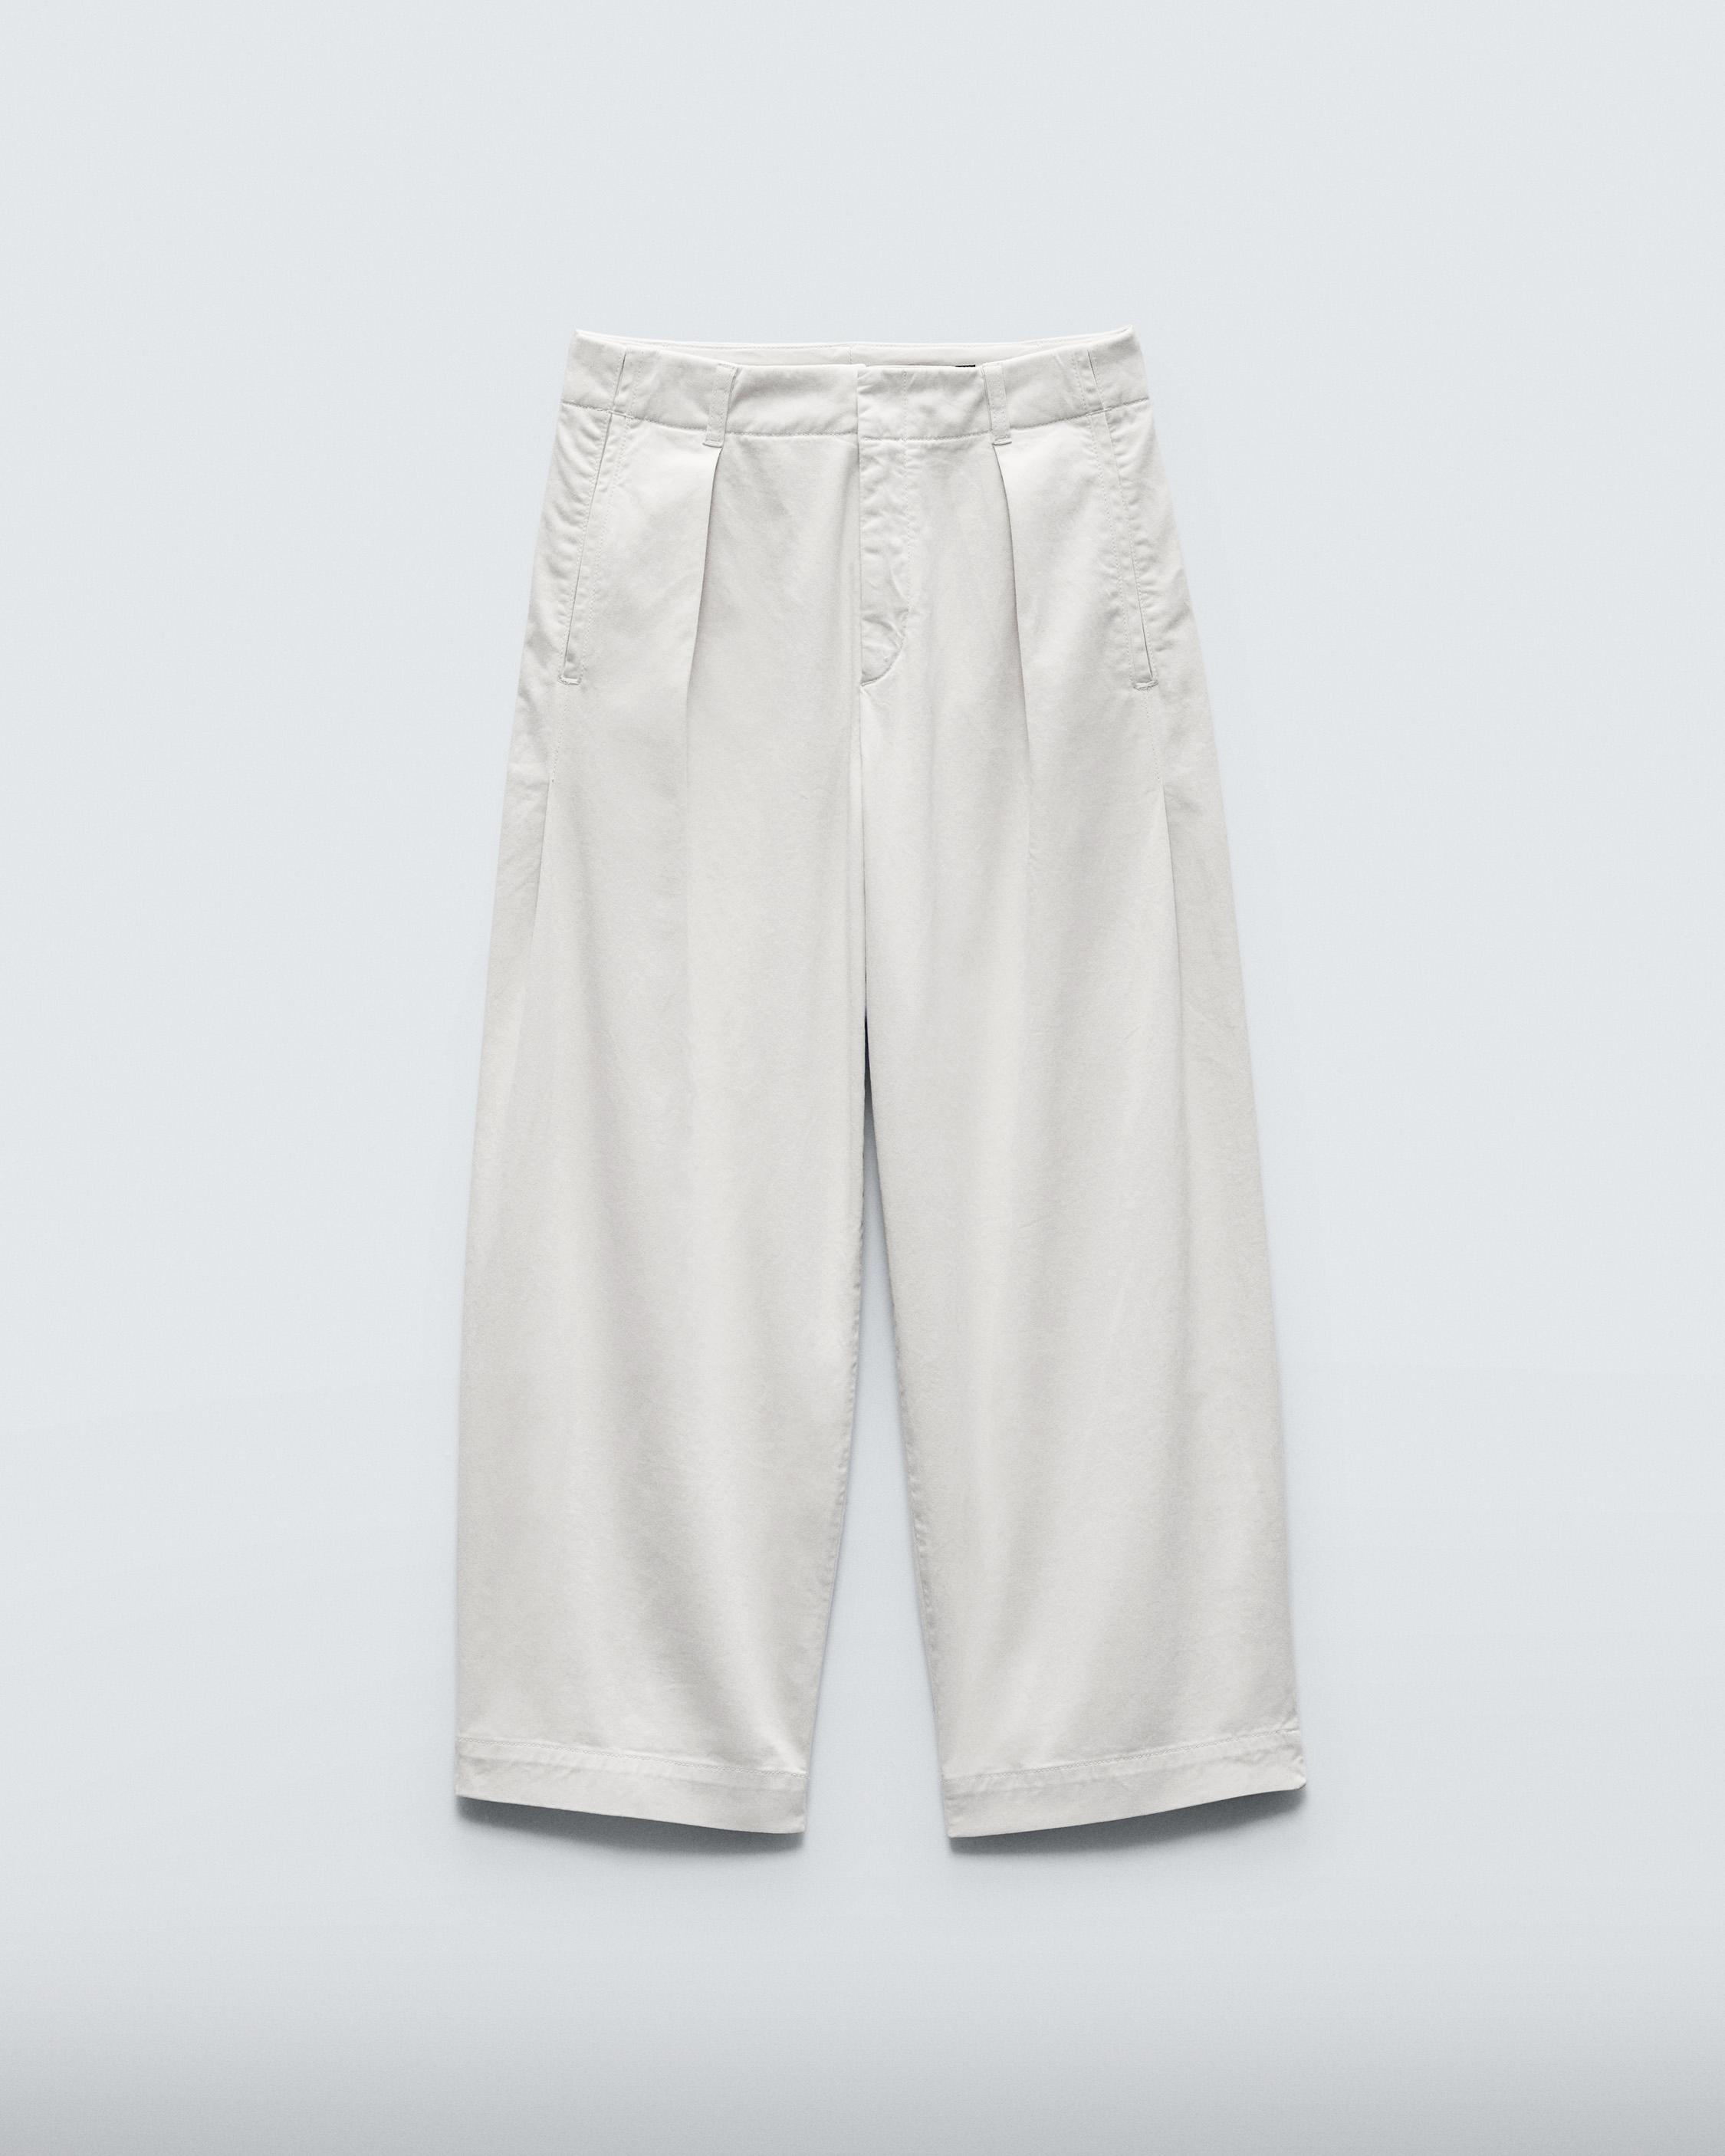 Donovan Cropped Cotton Pant
Relaxed Fit - 1